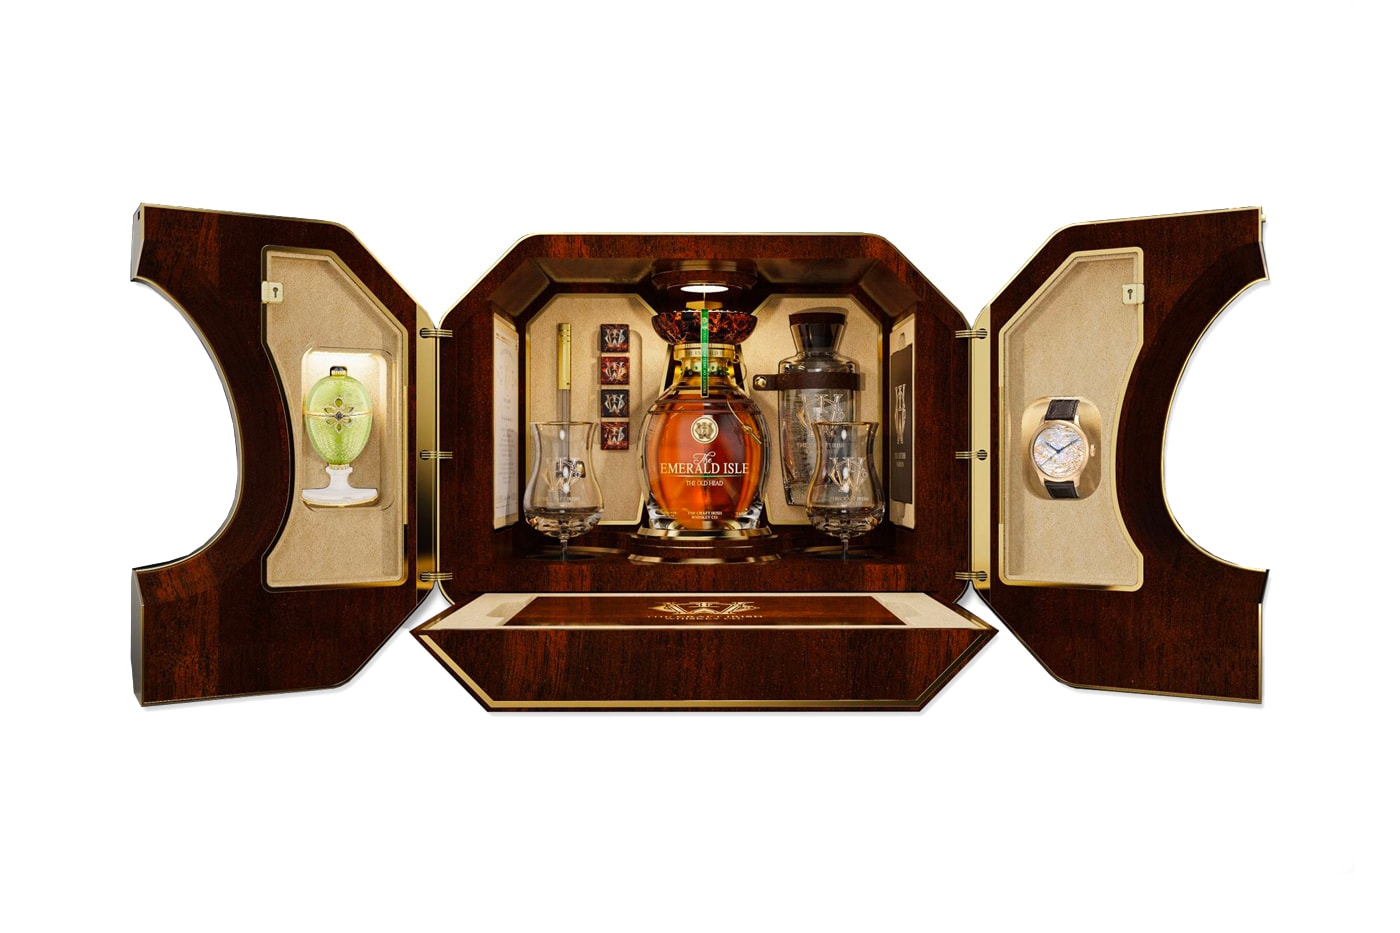 The Craft Irish Whiskey Co. Emerald Isle Fabergé whiskey collection diamonds russian luxury drinks alcohol sets walnut rare auctions 